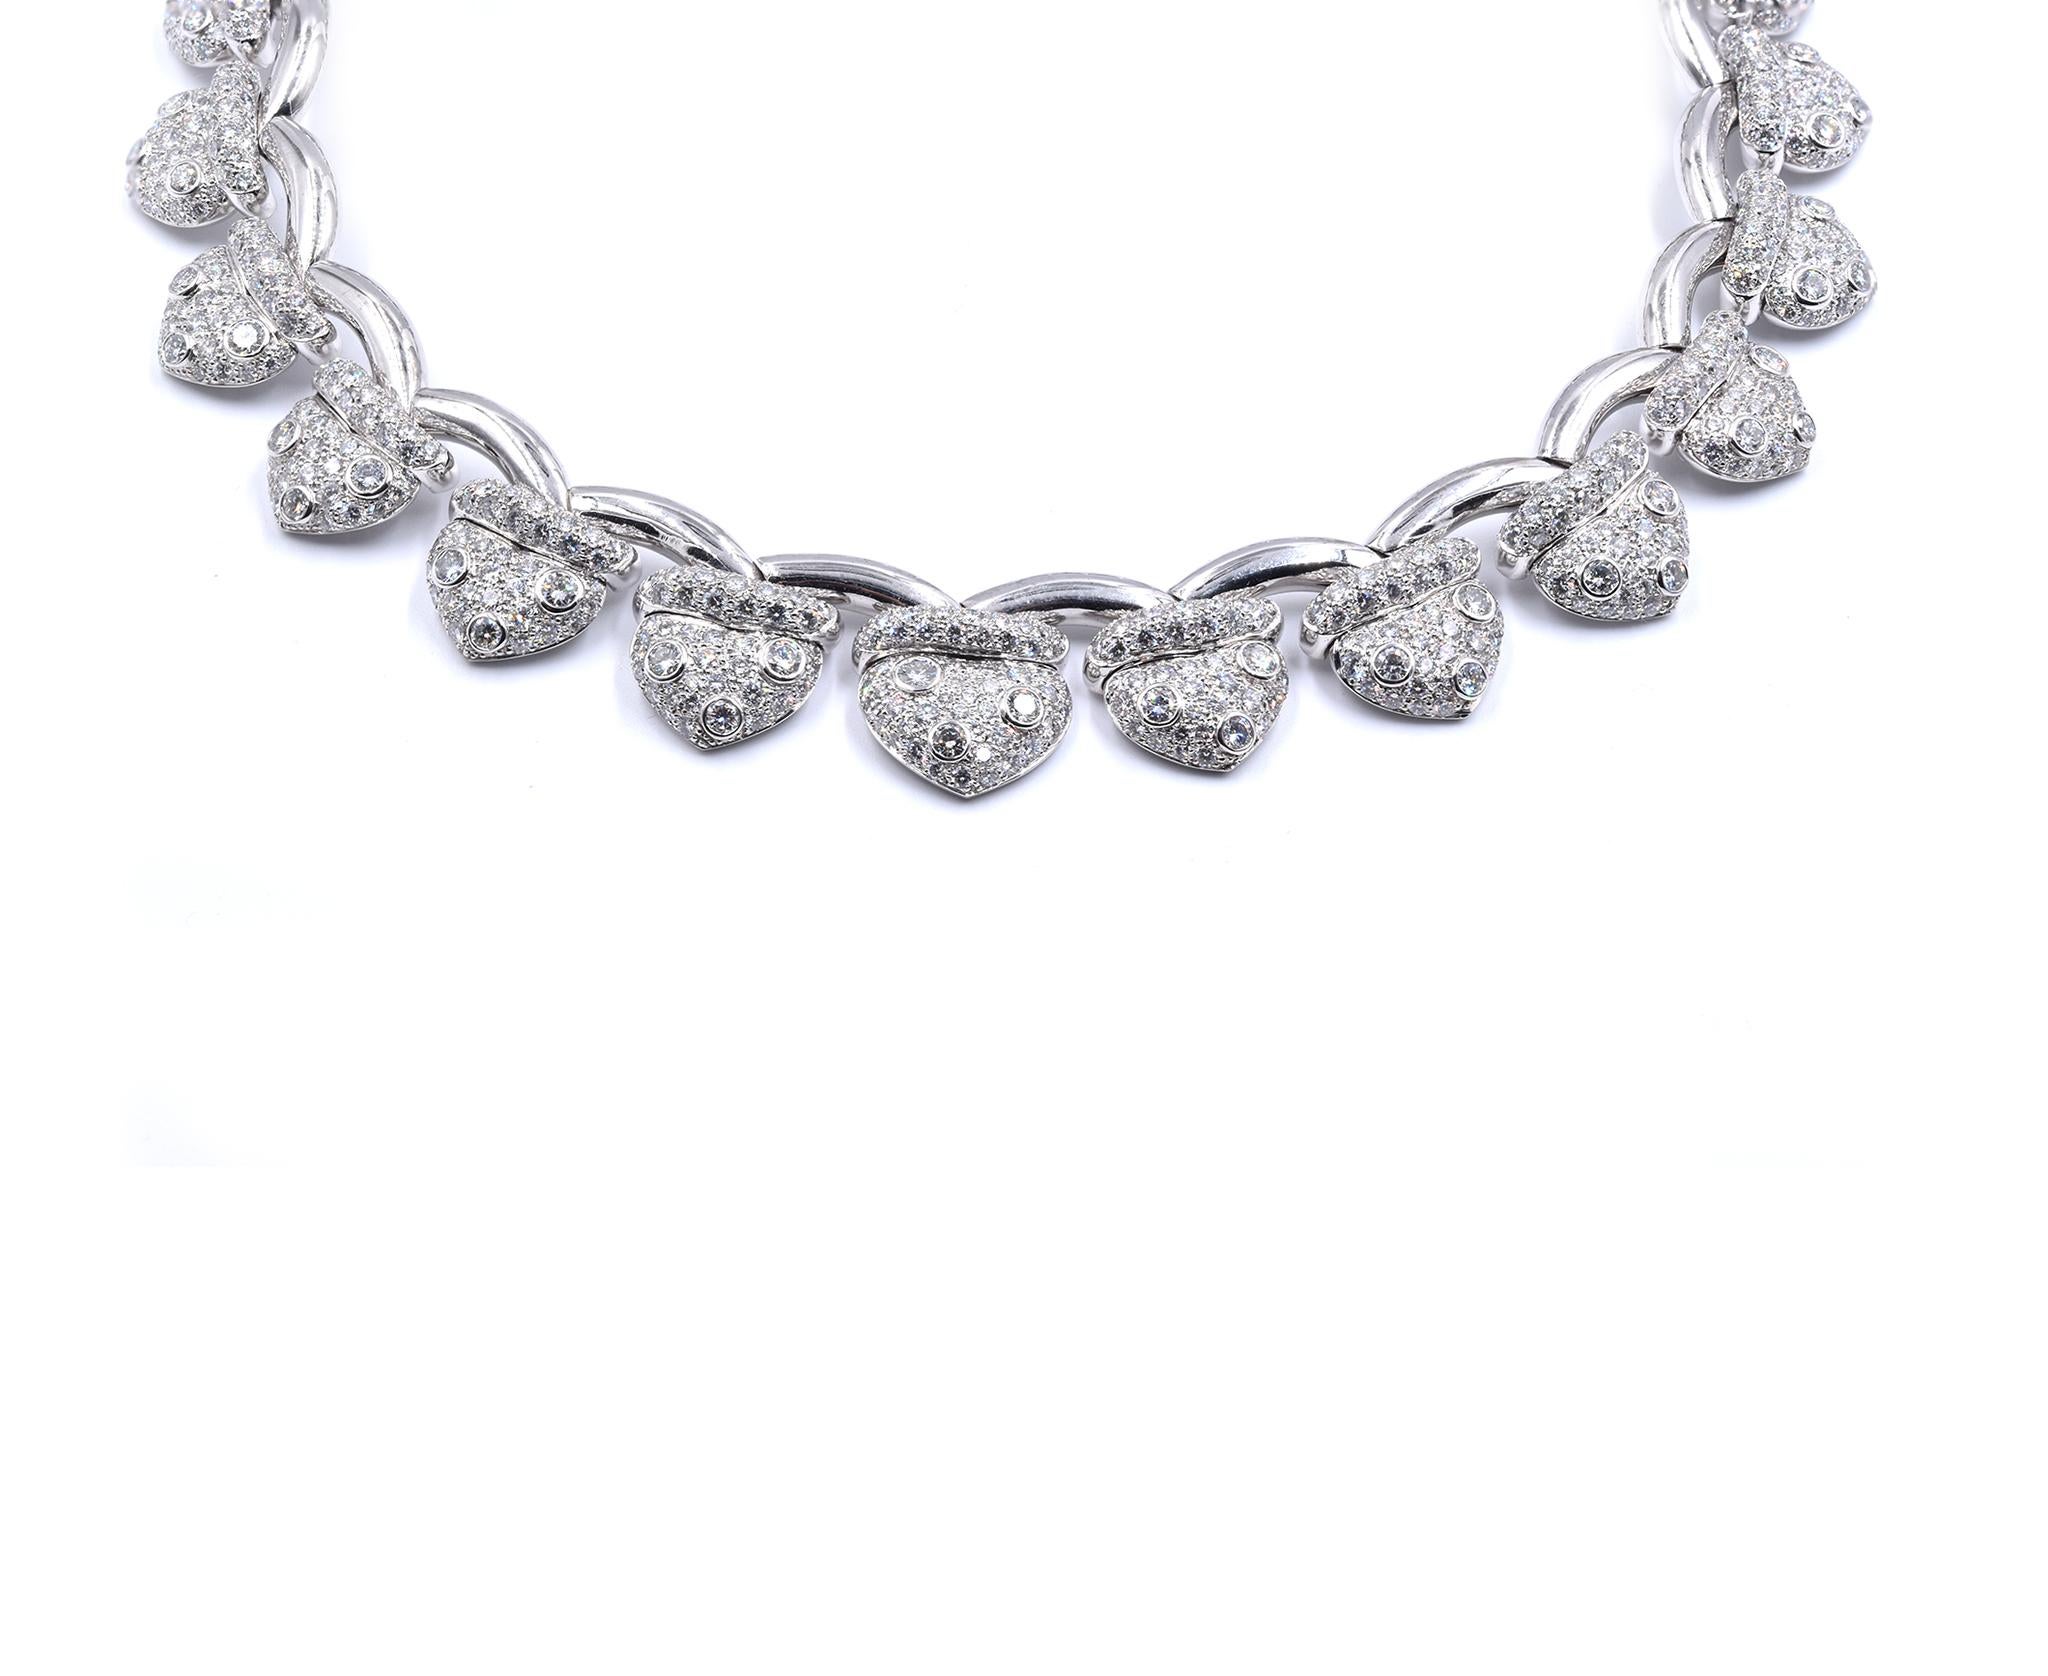 Designer: FRED
Material: 18K white gold
Necklace:
Diamond: 1219 round brilliant cut = 22.90cttw
Color: G
Clarity: VS1-2
Bracelet:
Diamond: 505 round brilliant cut = 9.46cttw
Color: G
Clarity: VS1-2
Weight: 192-12 grams
Measurement: bracelet measures